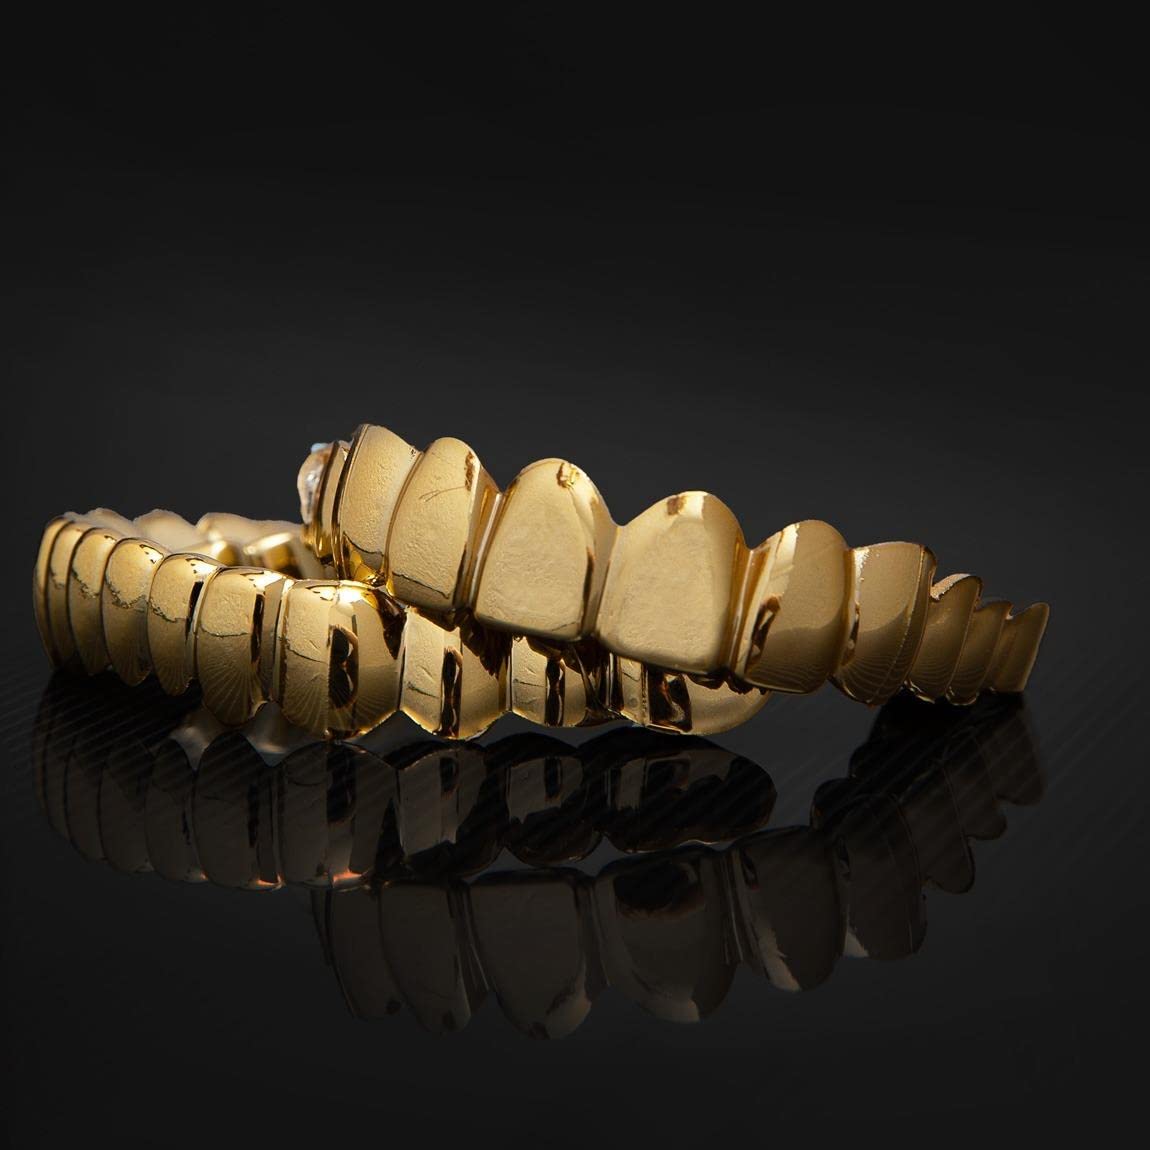 SowSmile Silicone Gel Grillz Gold Grills for Your Teeth, Gold Teeth Tooth Grillz for Men and Women, Grillz Hip Hop, Jewelry Grills for Teeth